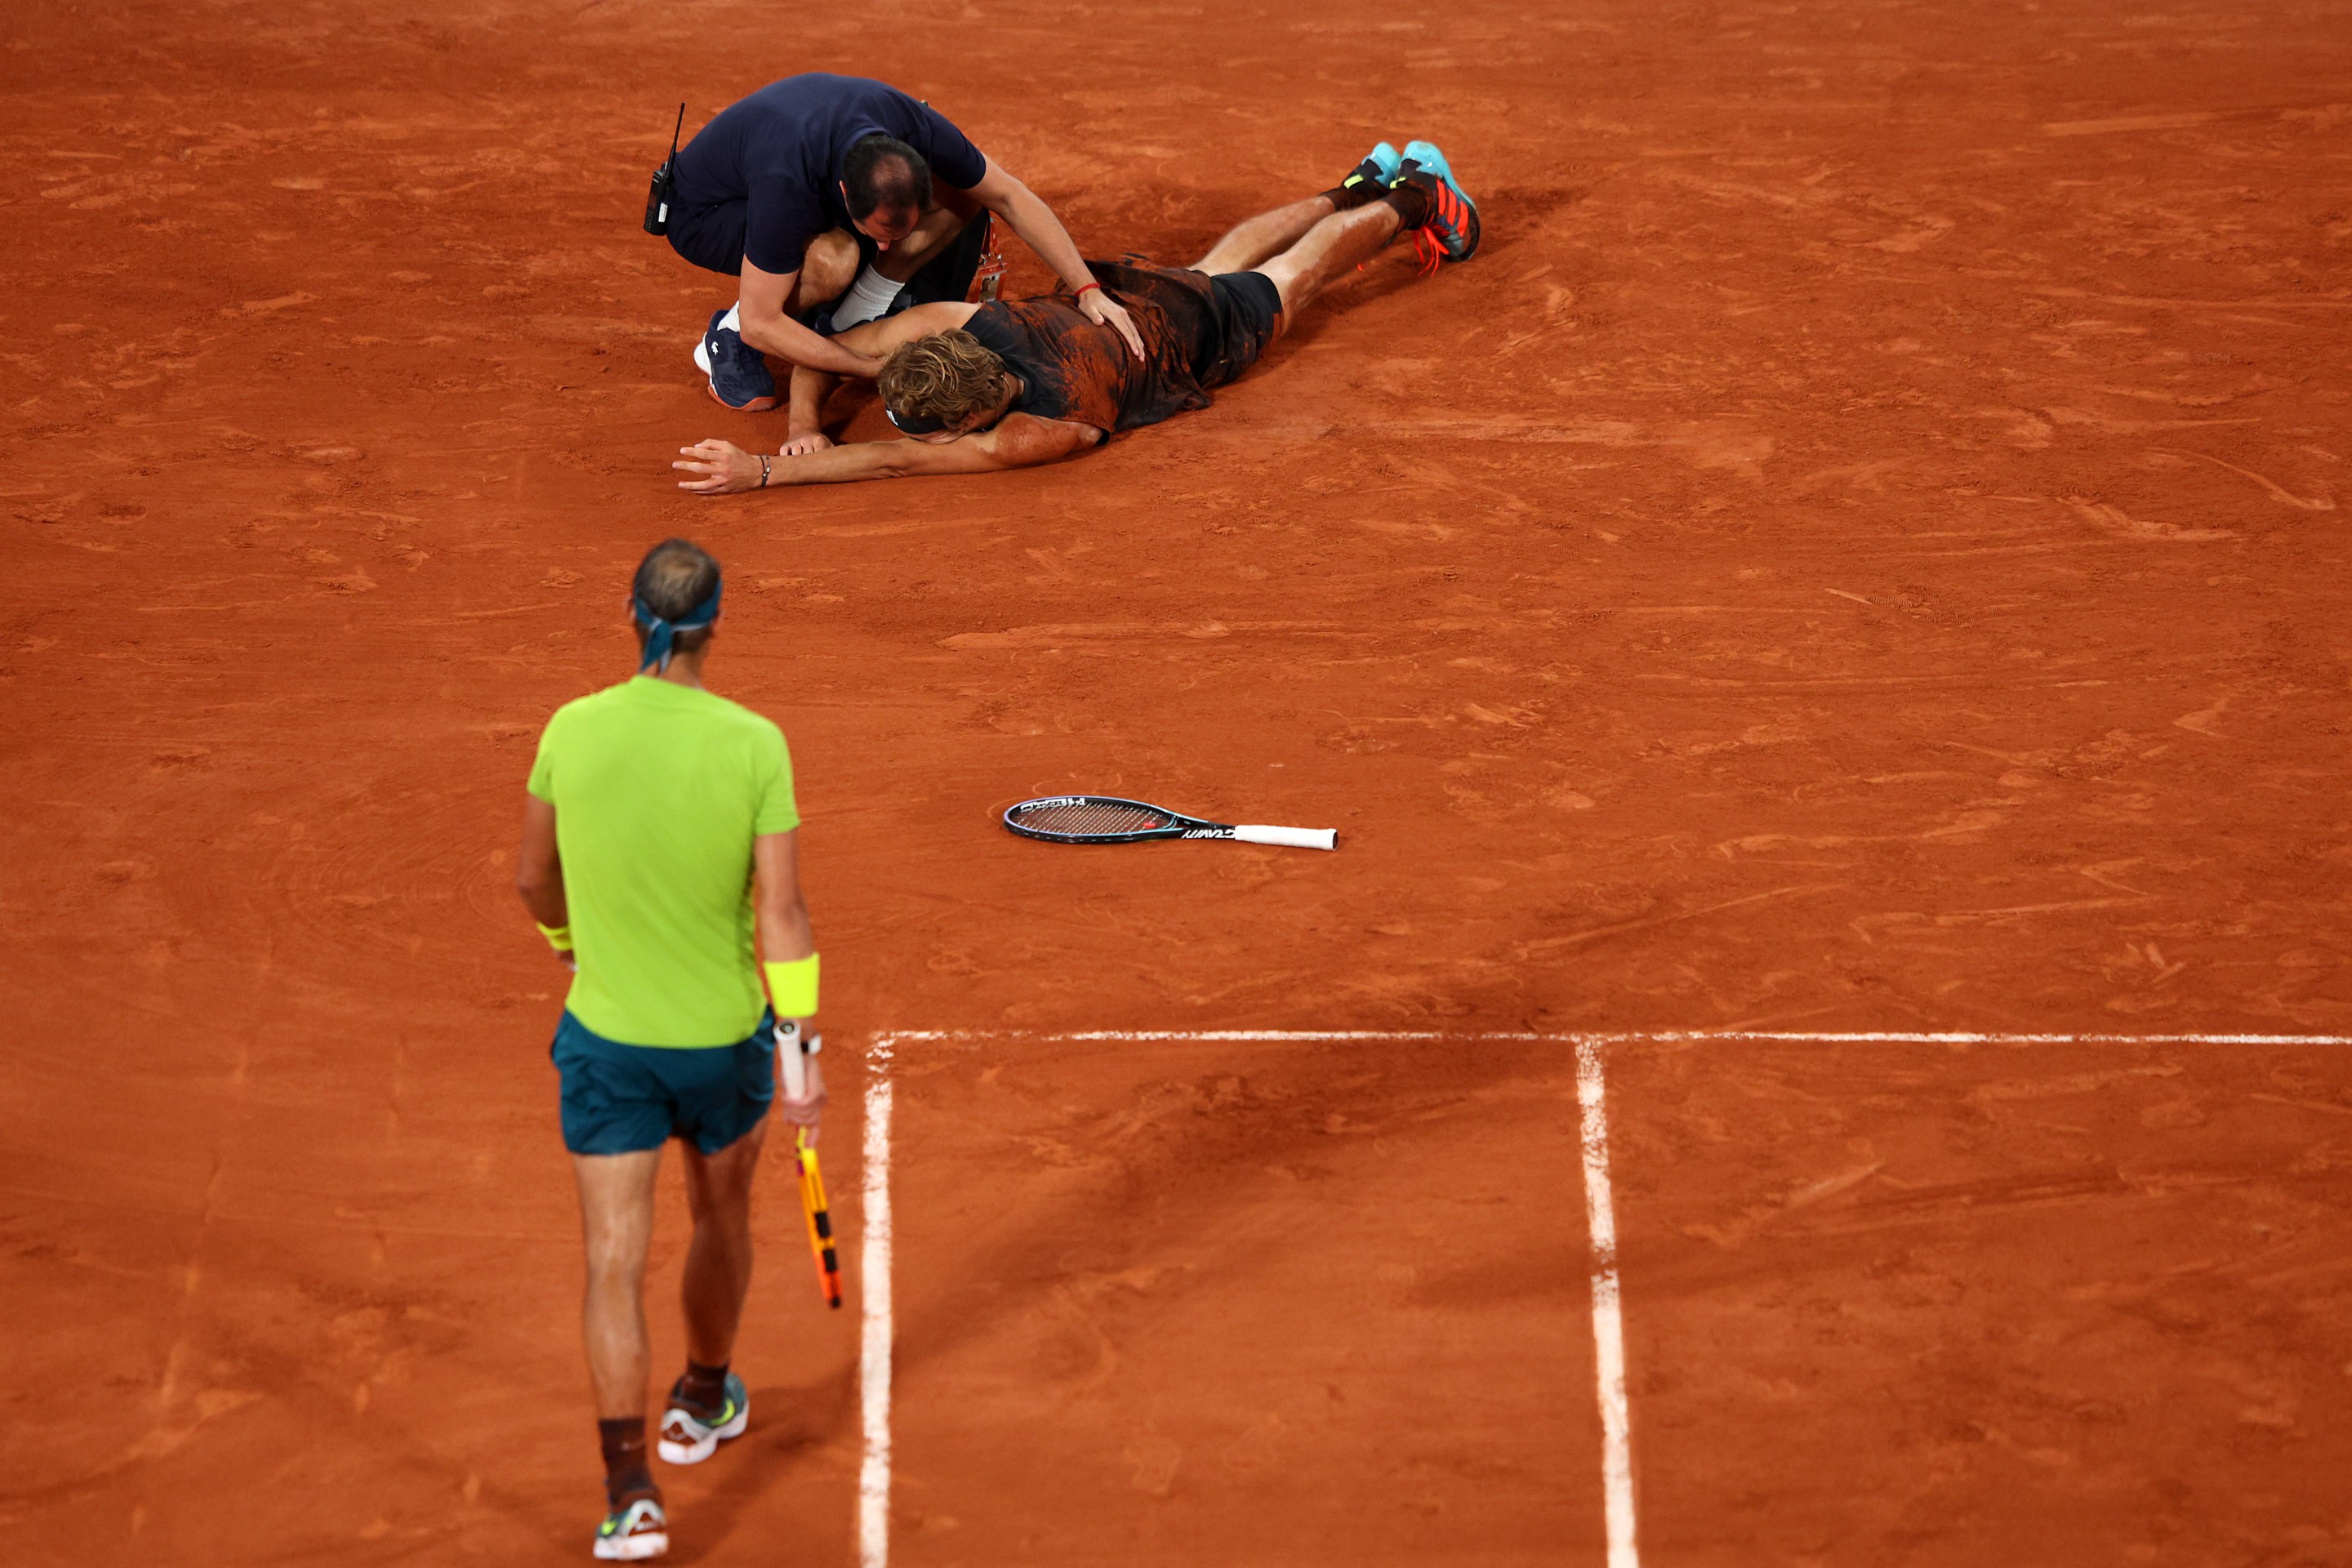 Alexander Zverev suffers a severe ankle injury at the French Open.